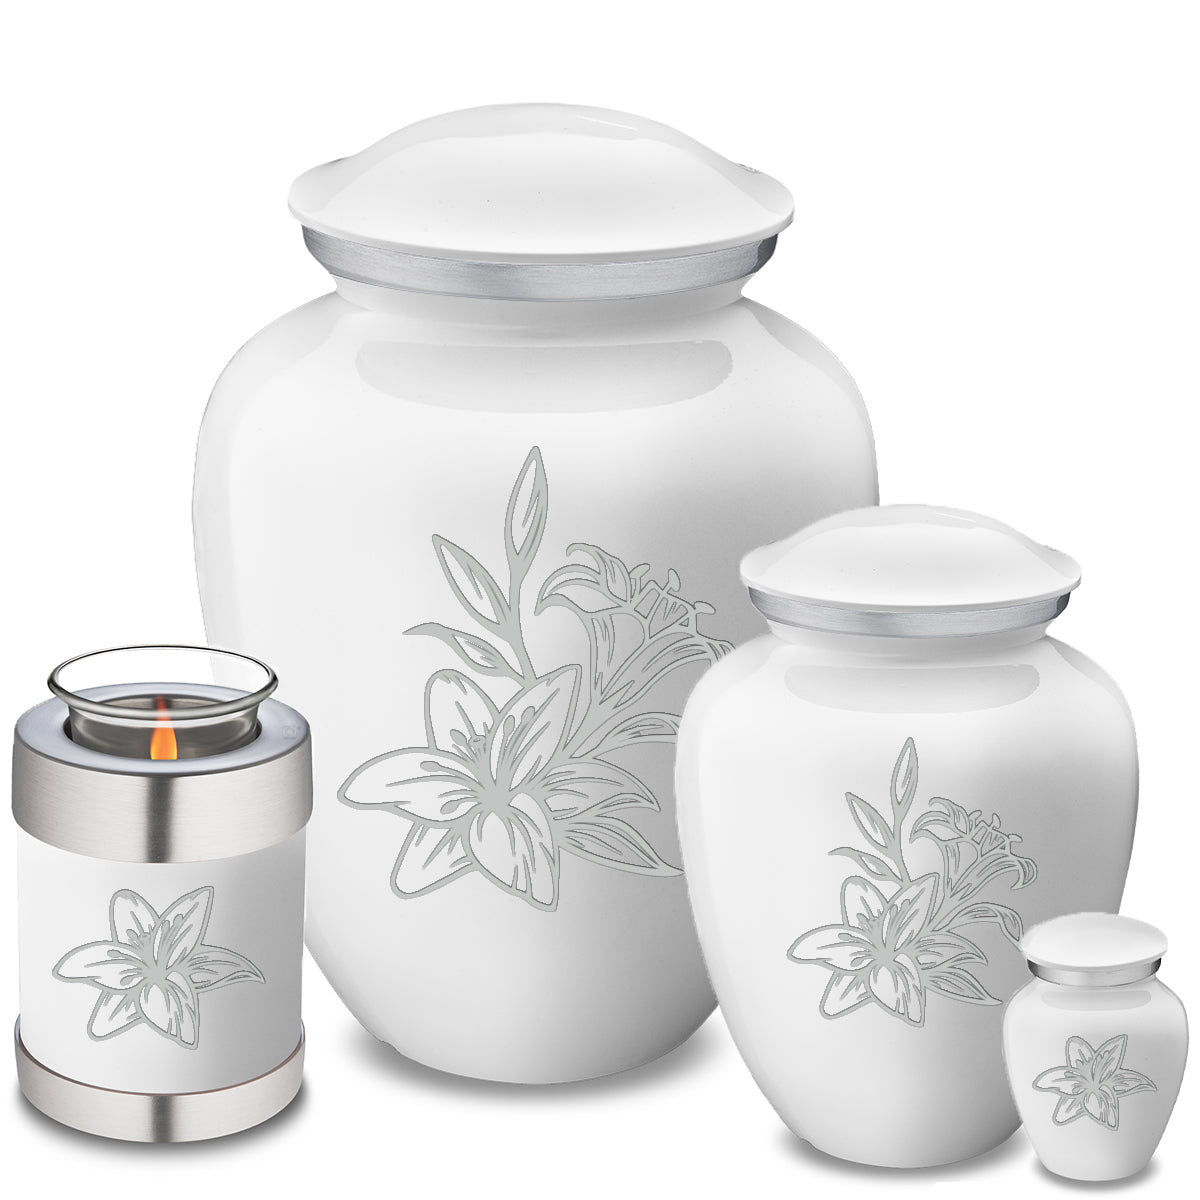 Candle Holder Embrace White Lily Cremation Urn